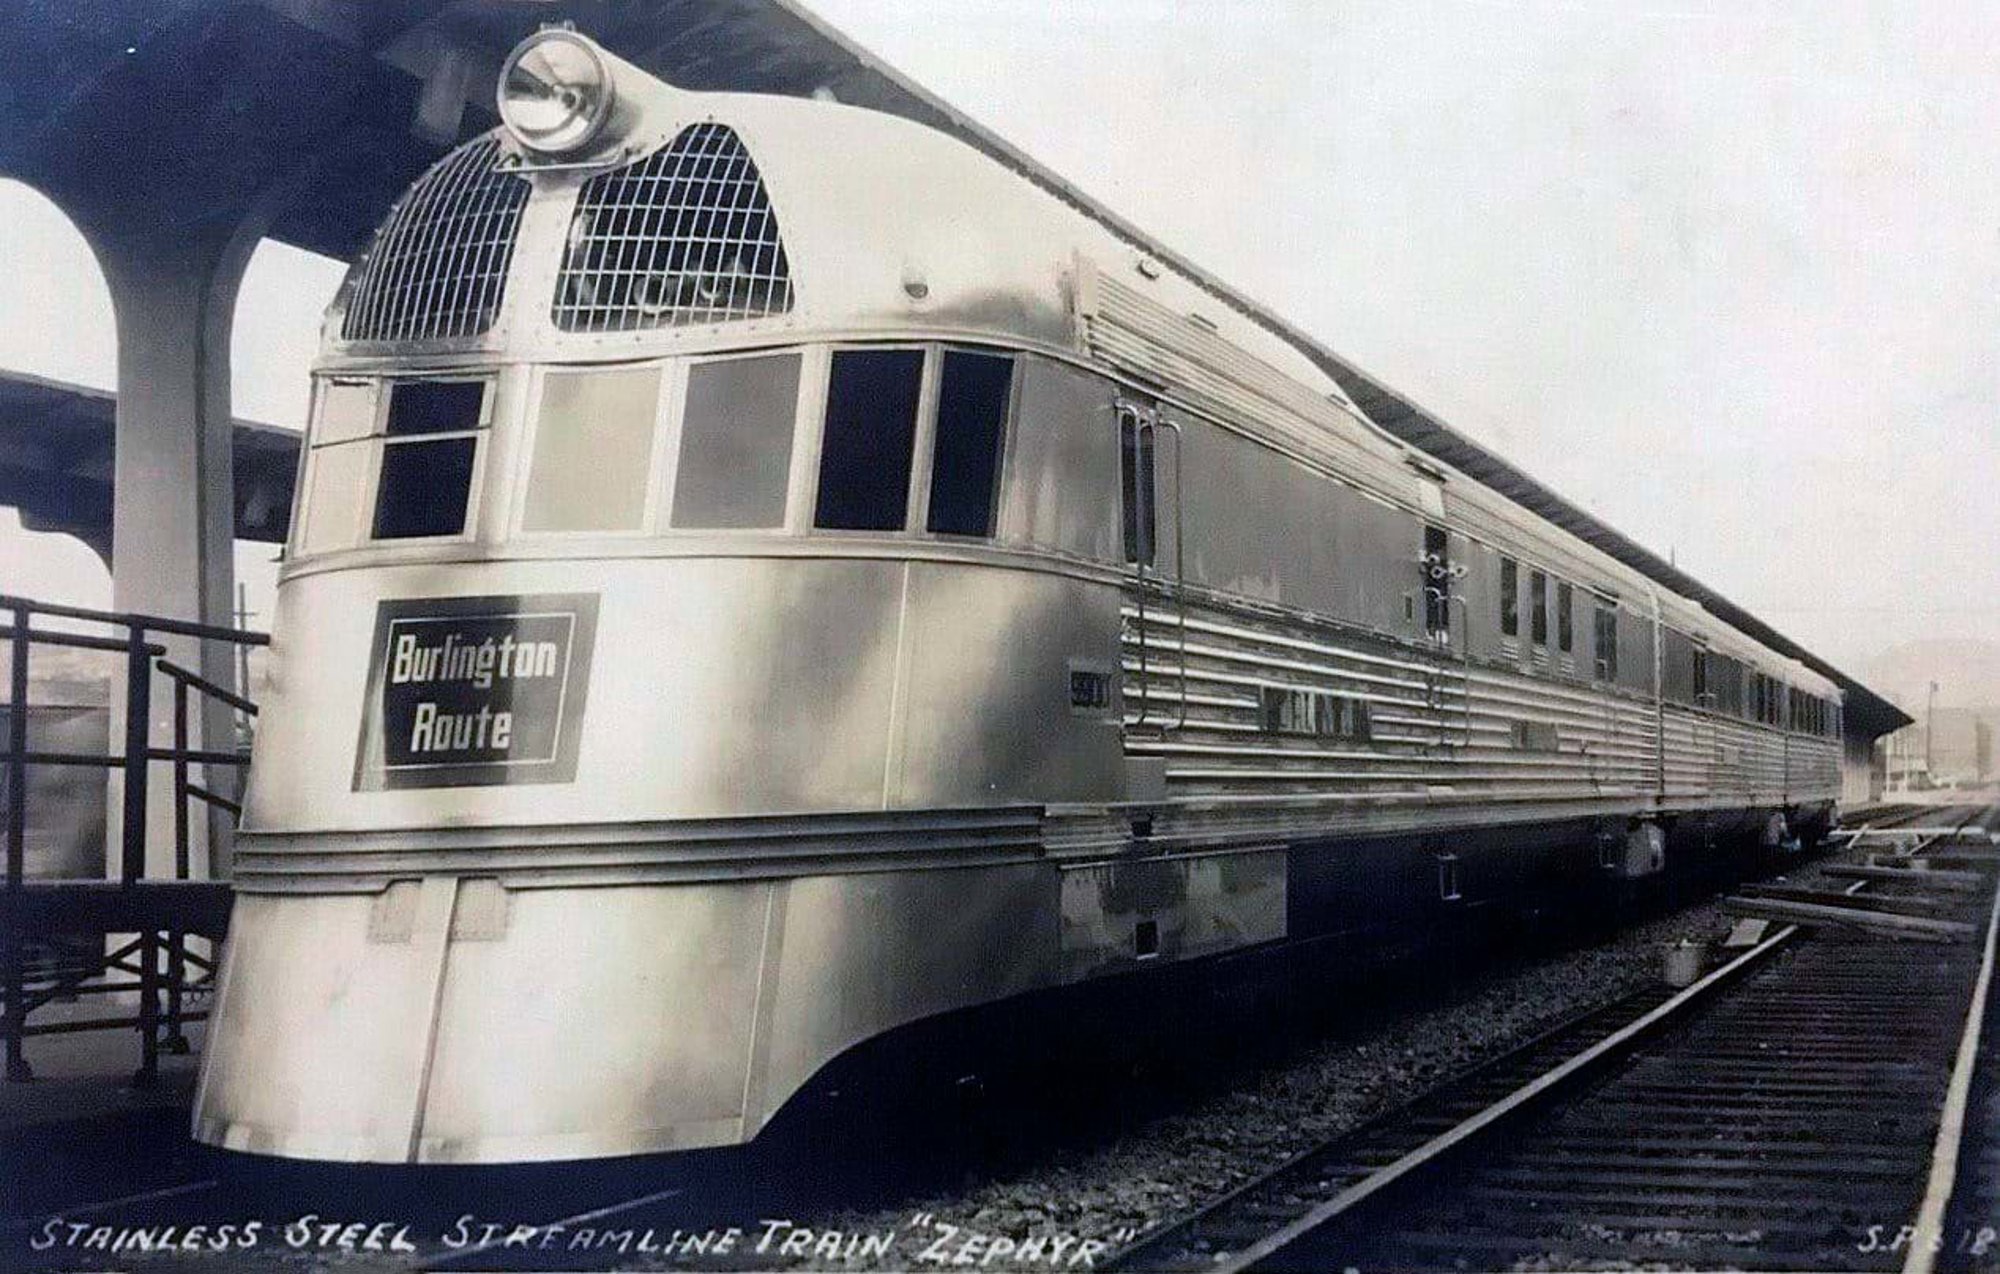 The stainless-steel Pioneer Zephyr, built by the Budd Company and first unveiled at the Pennsylvania Railroad's Broad Street Station in Philadelphia,1934. Budd pioneered new ways of welding large, thin sheets of stainless steel.